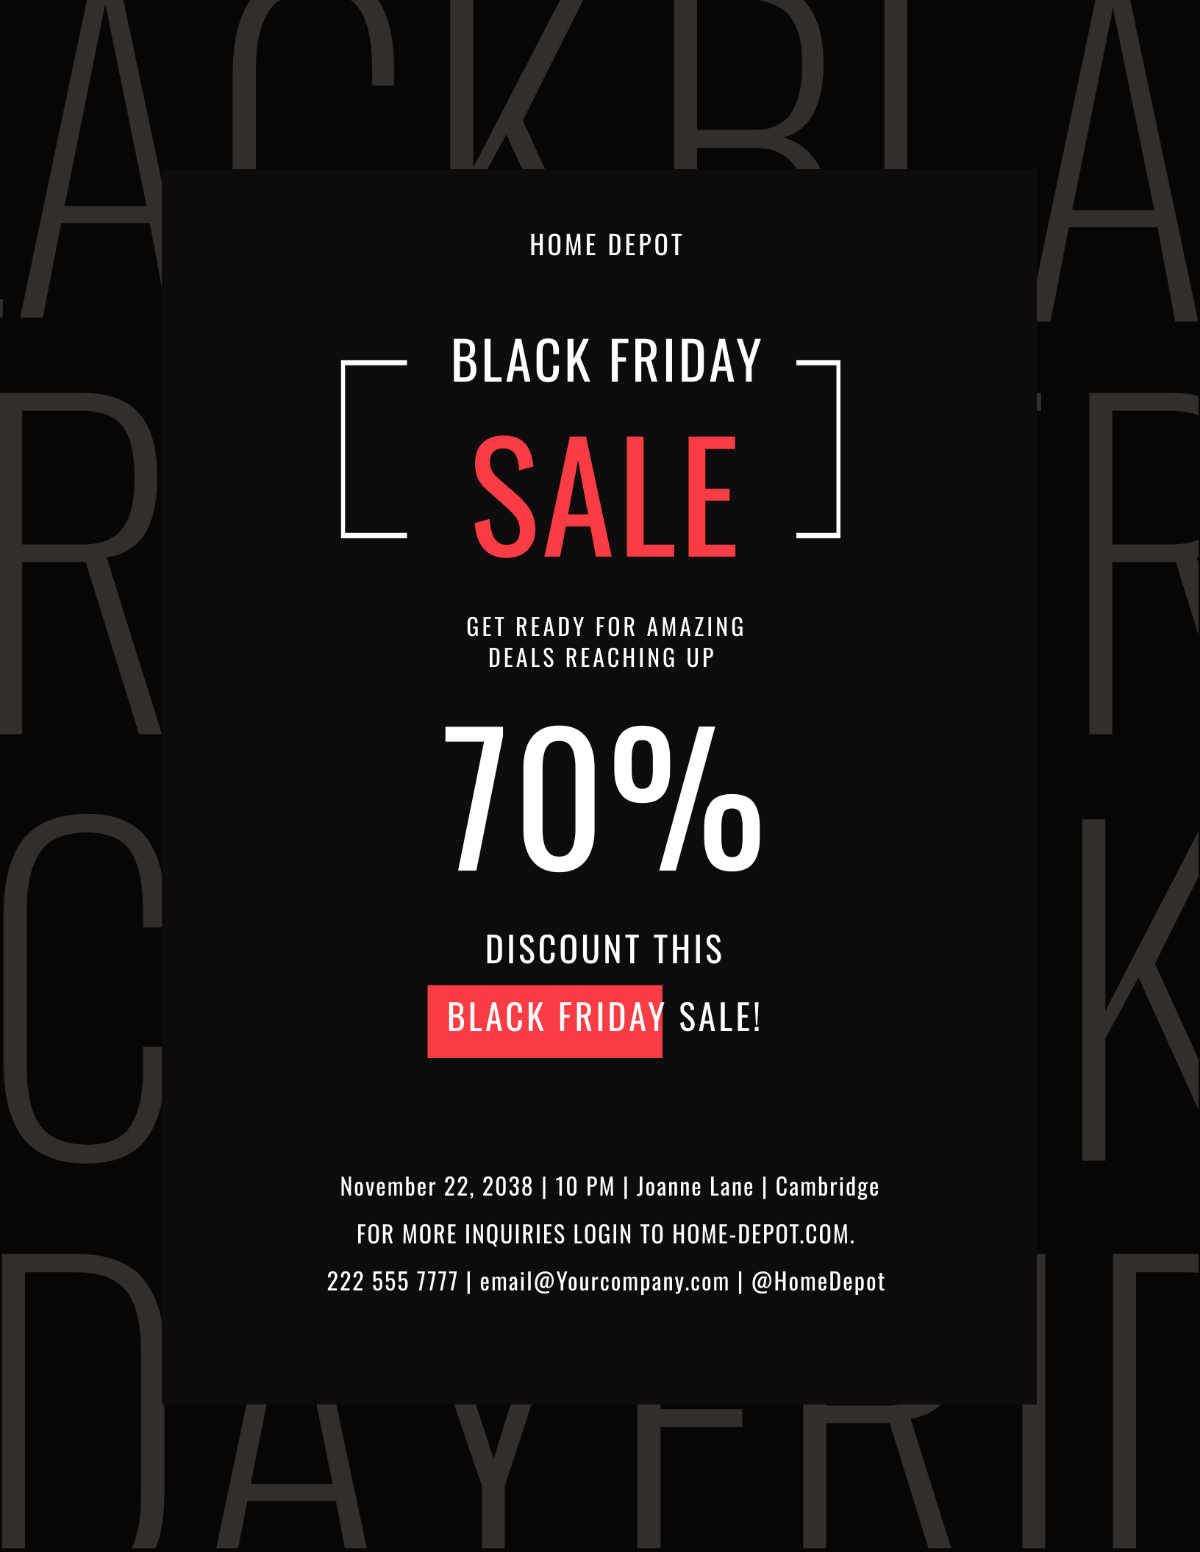 Black Friday Promotional Flyer Template